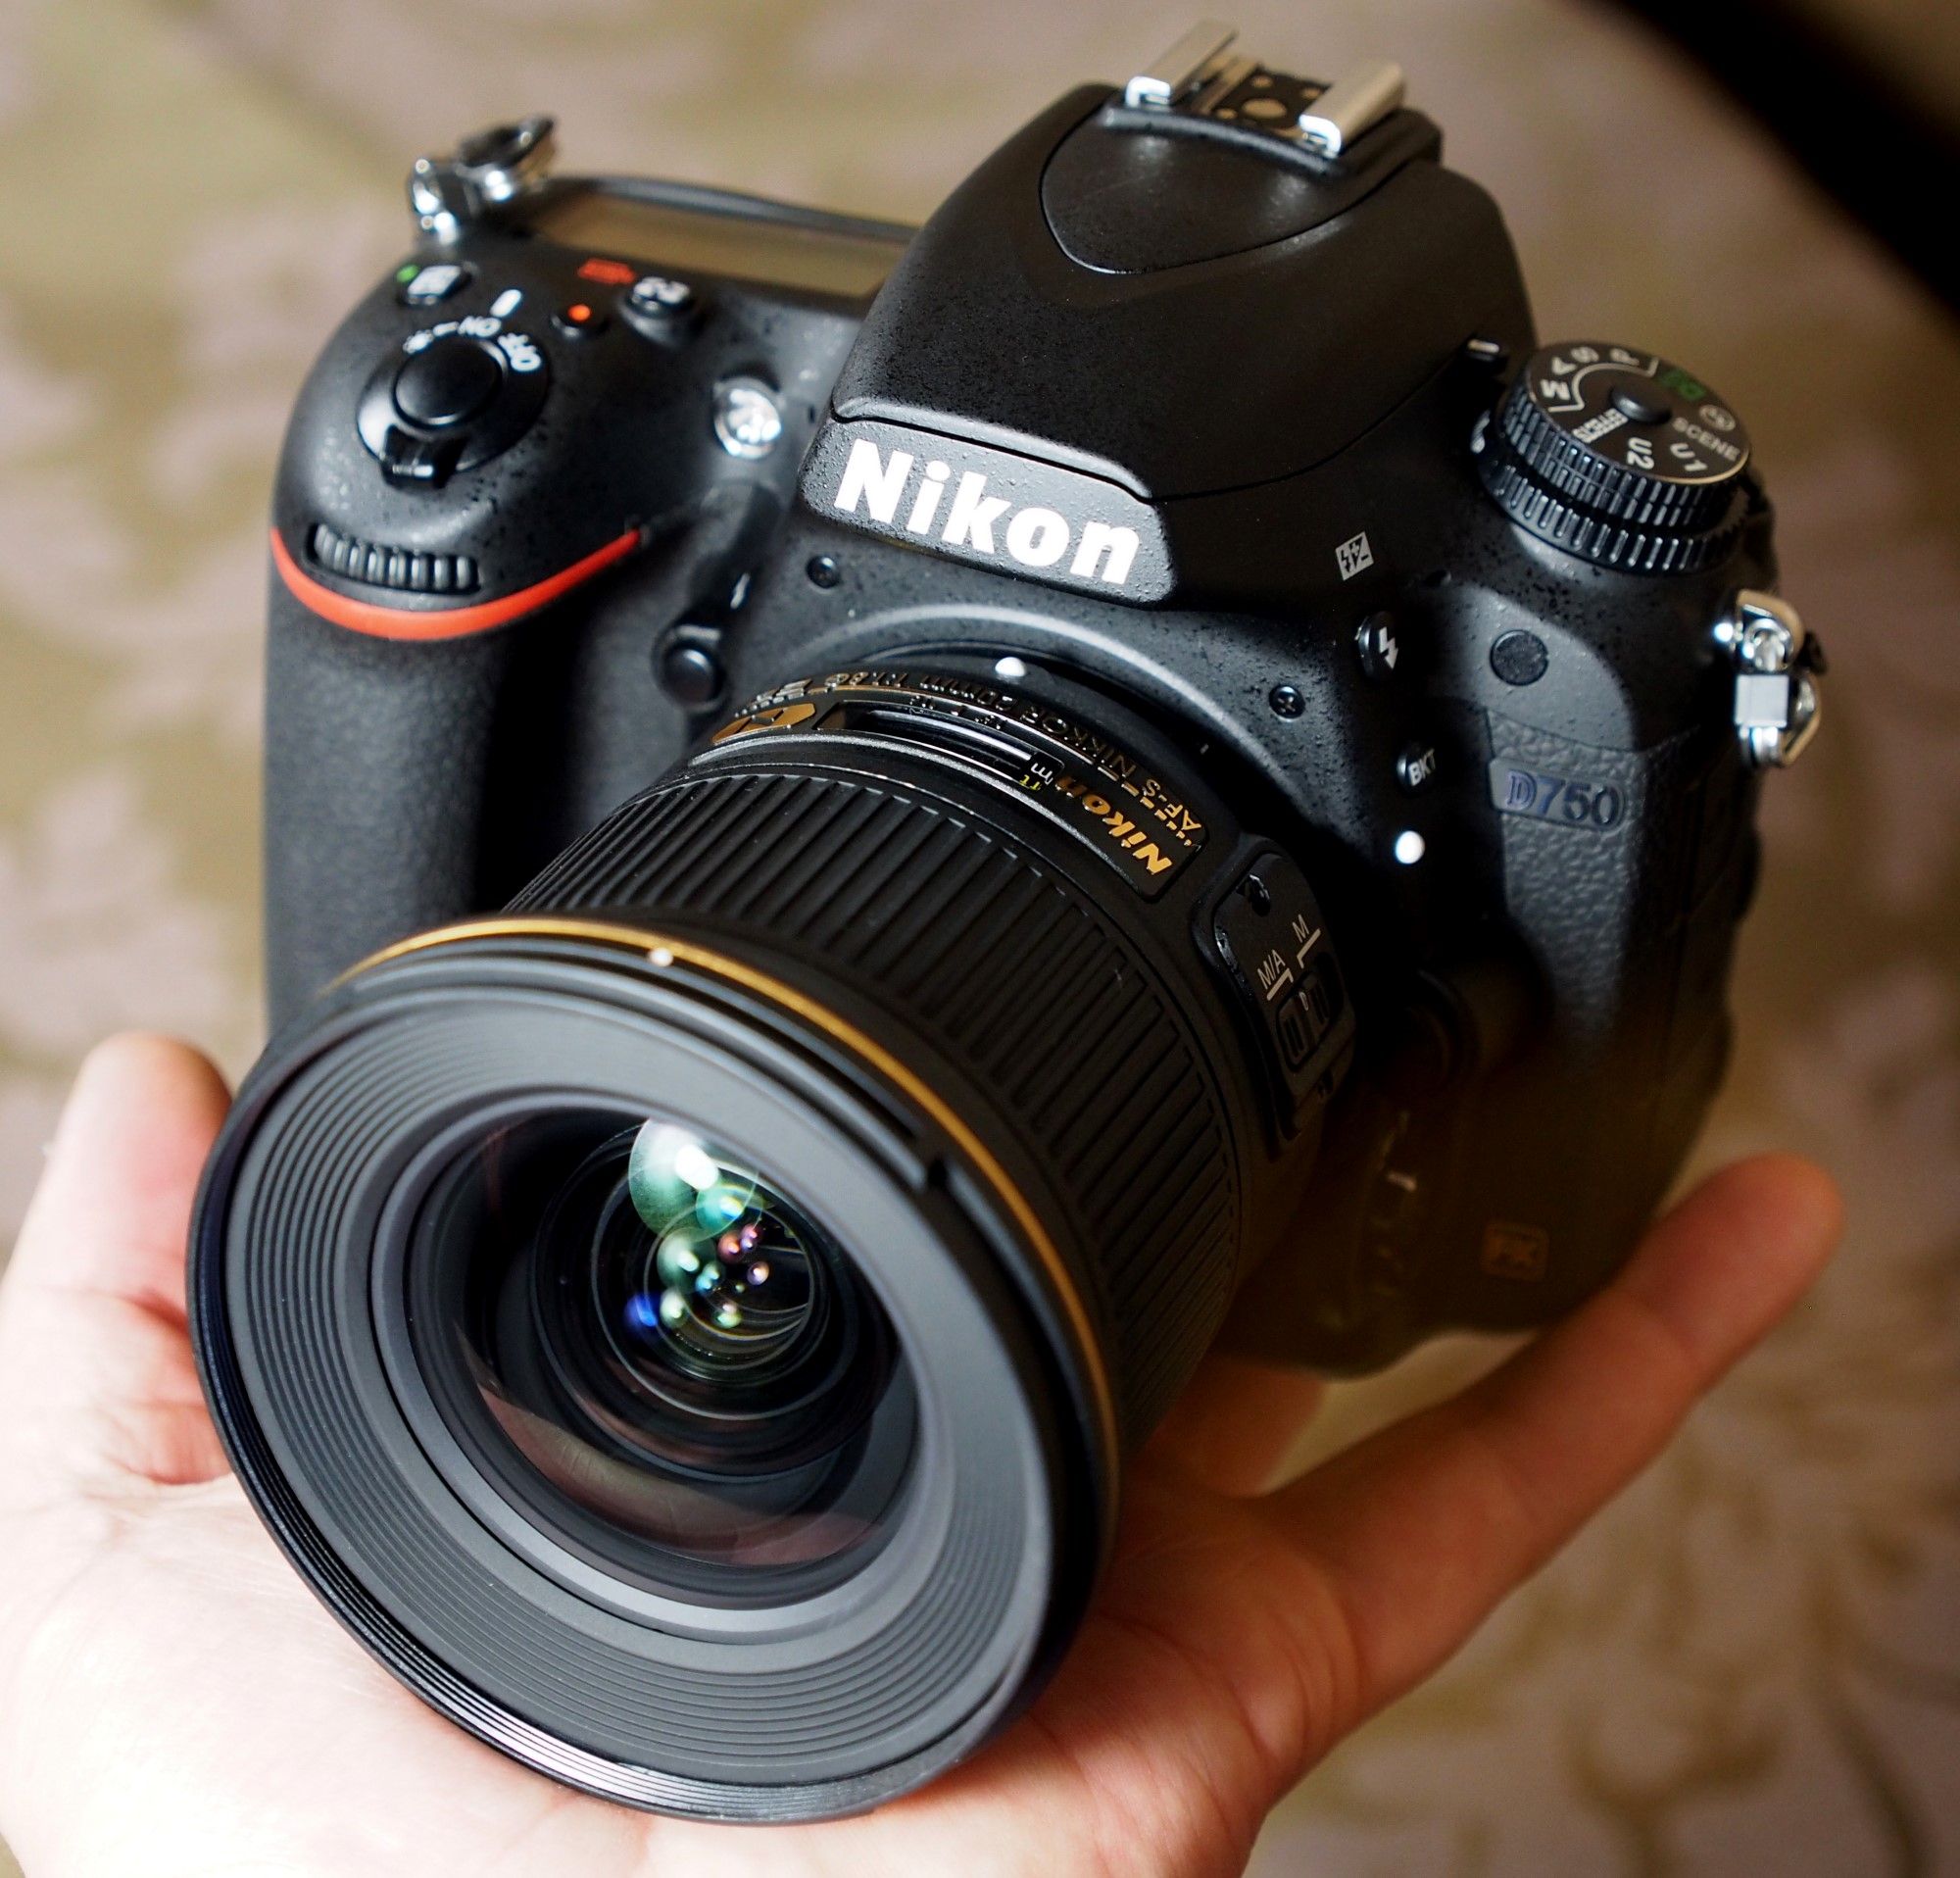 Nikon D750 Review - Updated